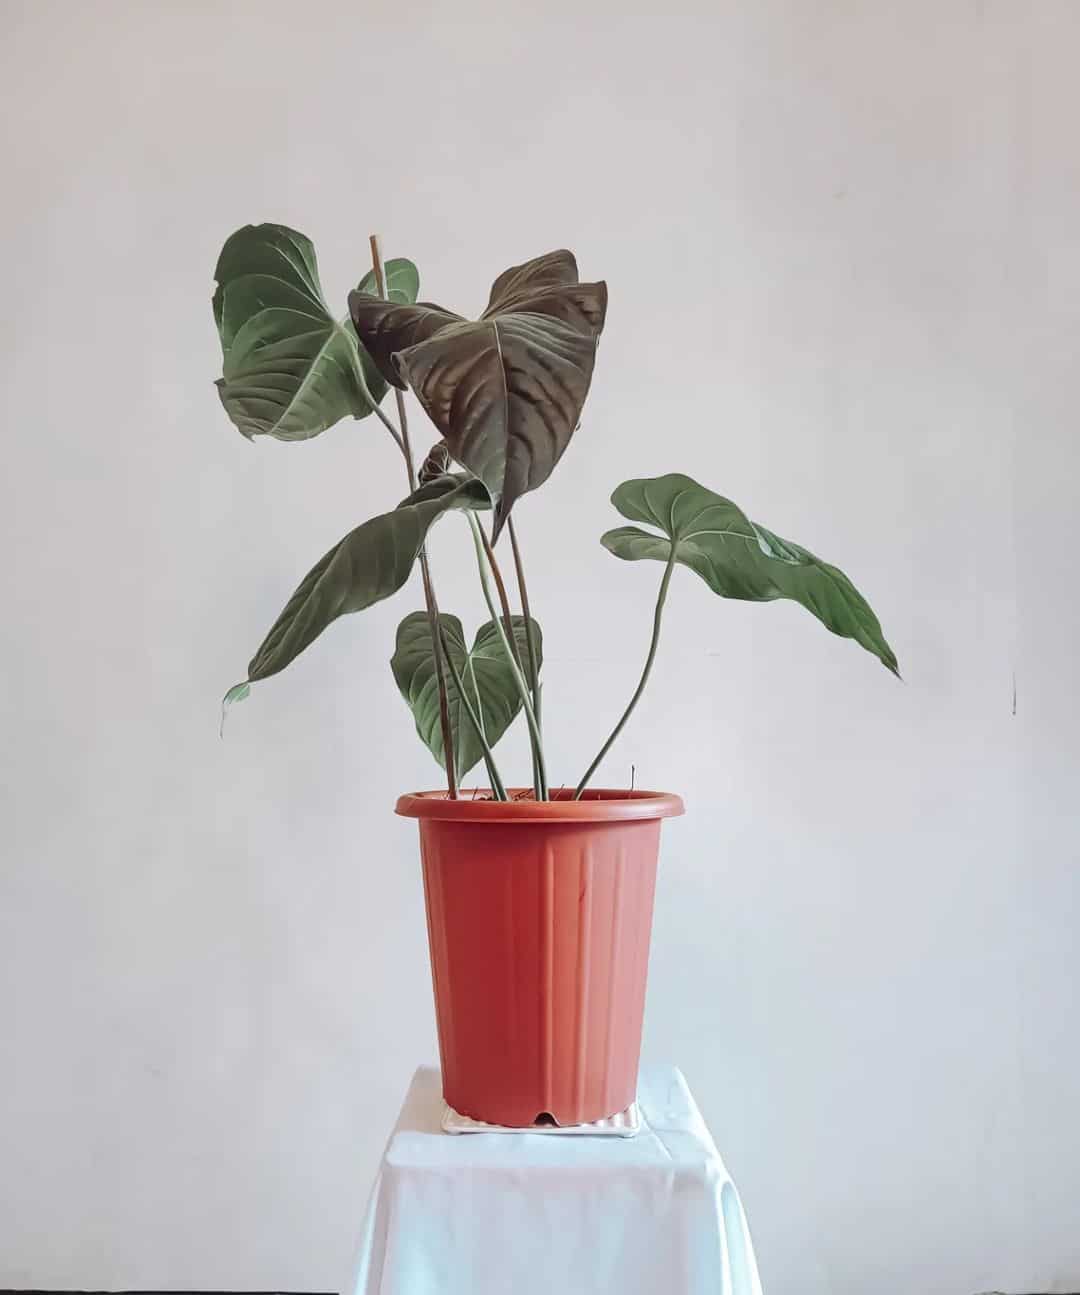 Anthurium Chamberlainii in a pot